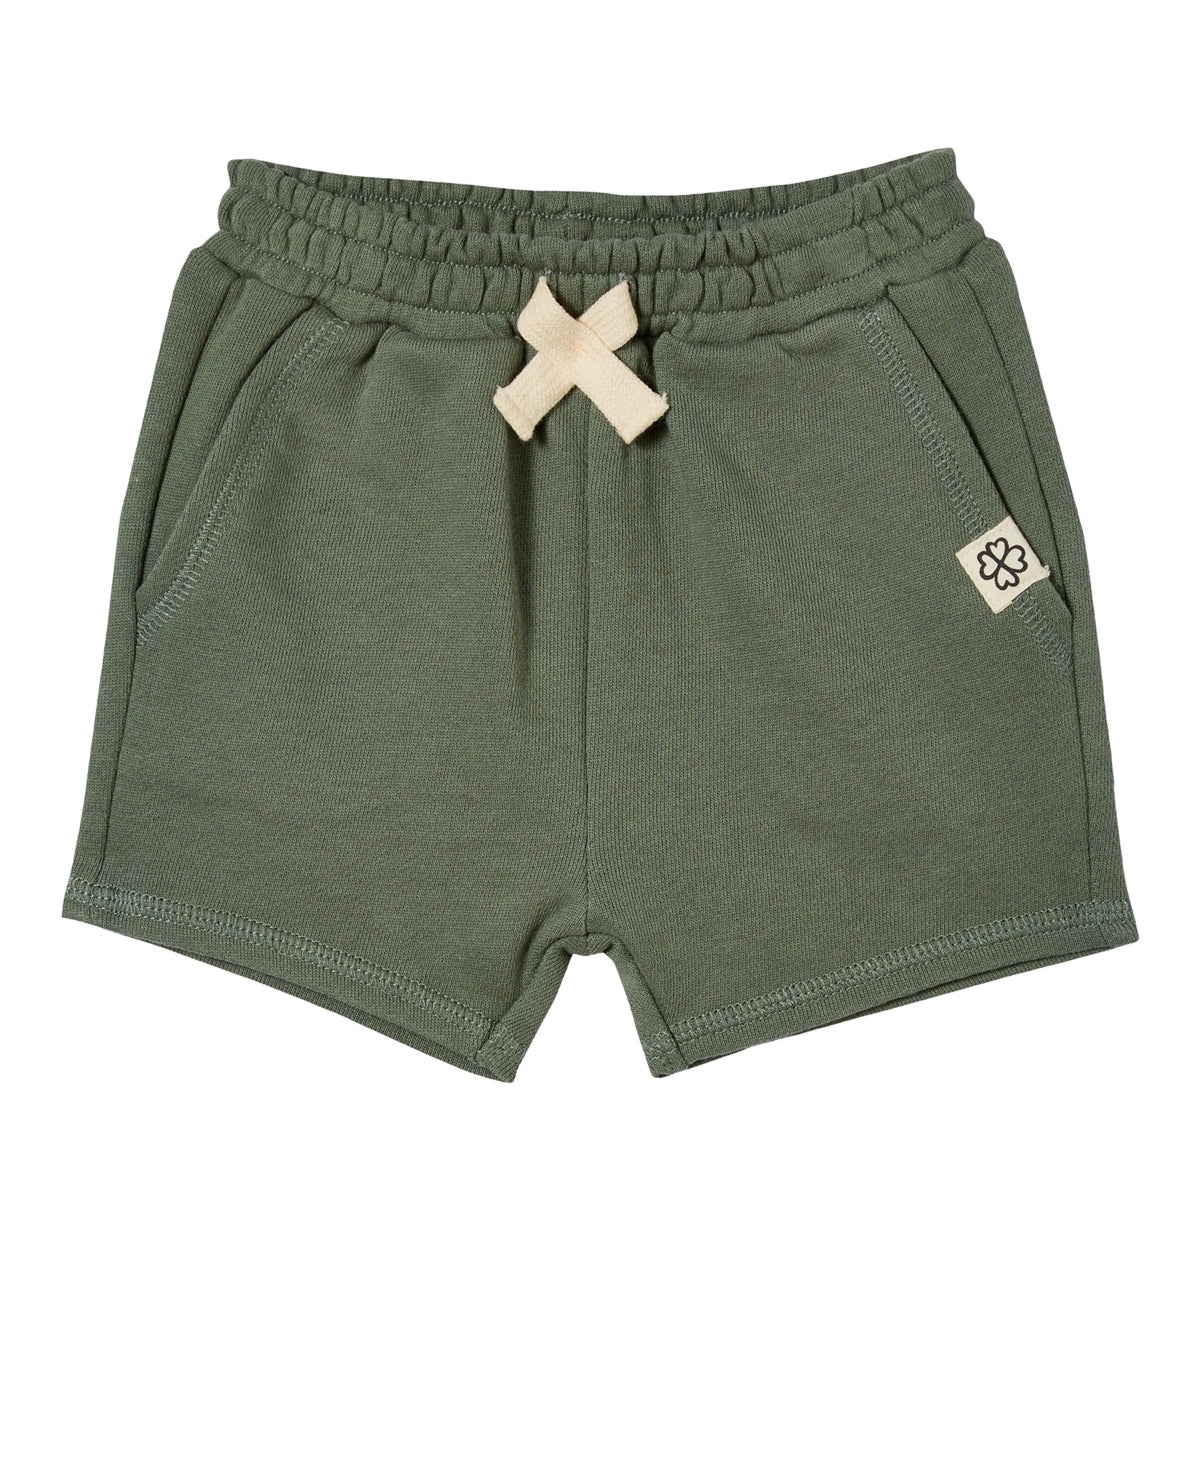 COTTON ON Baby Boys Fleece Shorts Swag Green 3-6 months